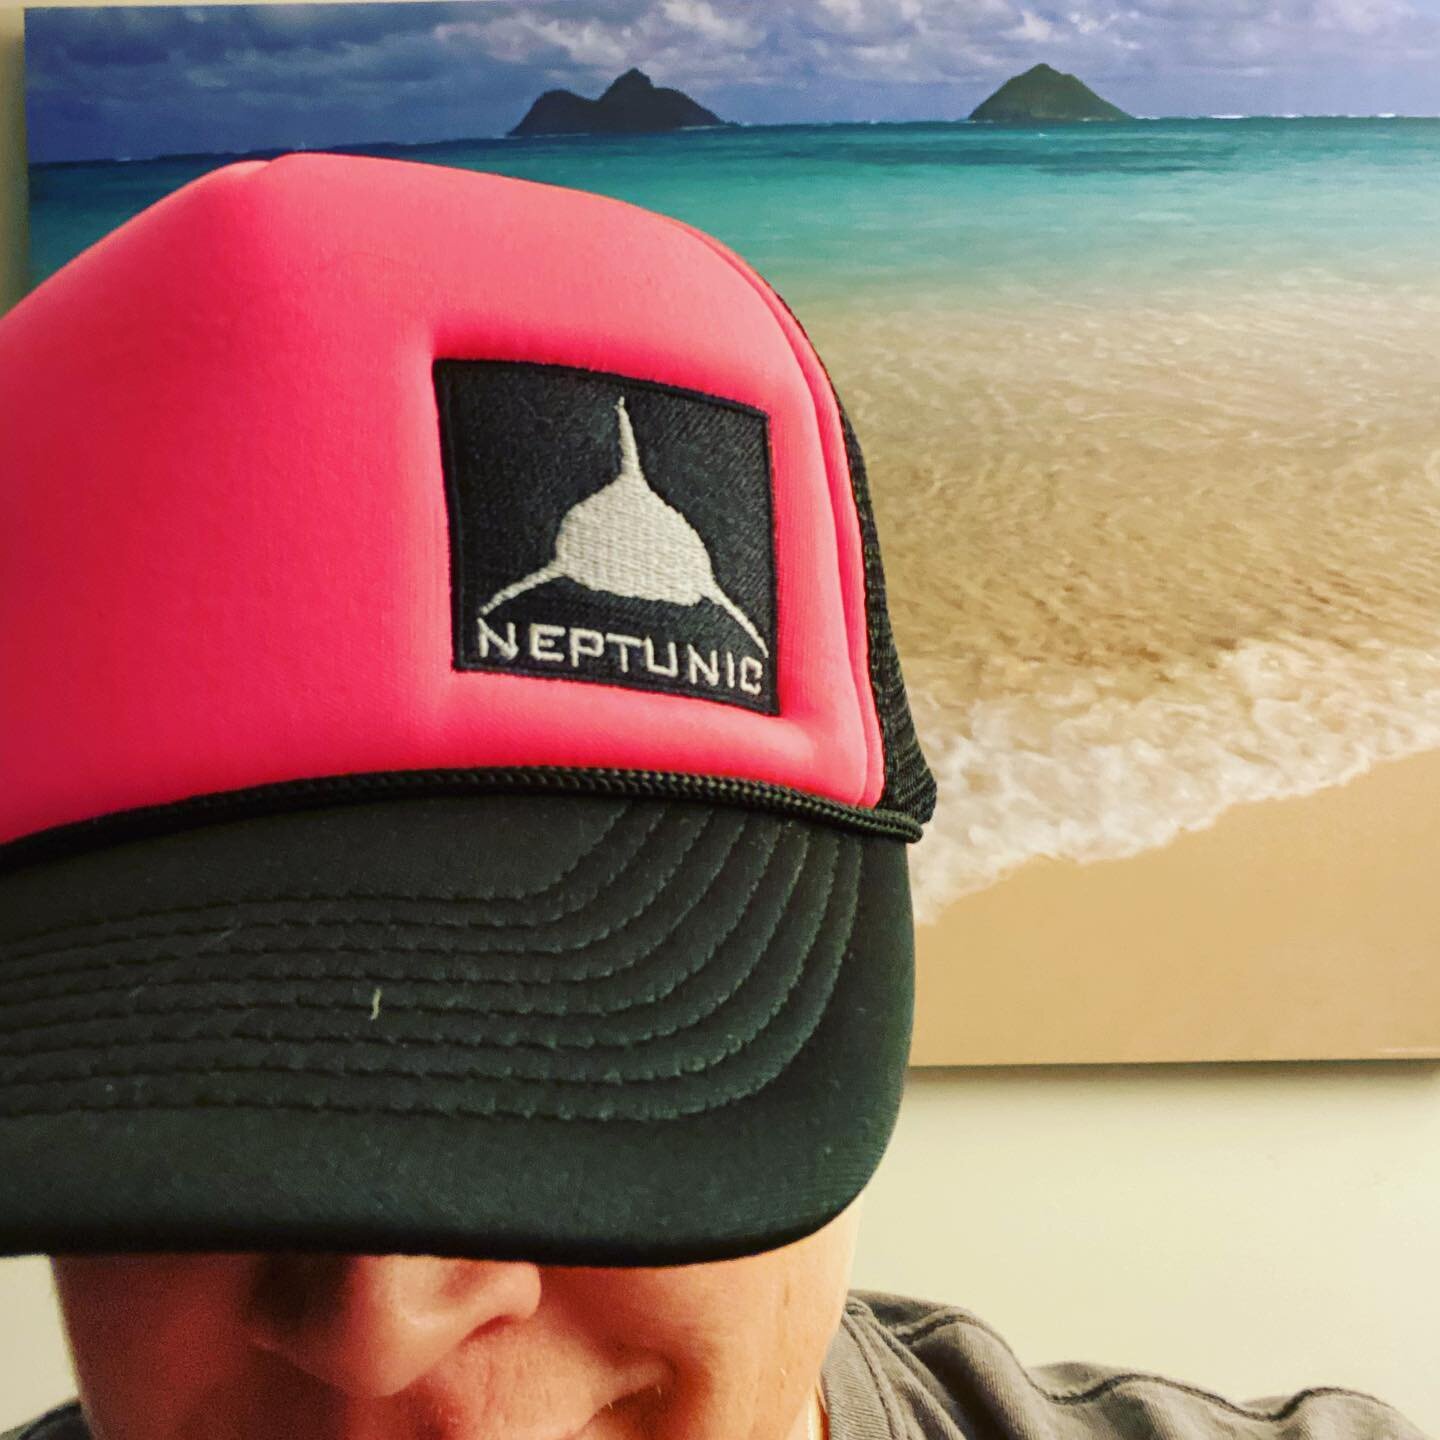 My absolute favorite week of the year! 🦈🦭 #sharkweek #thankyou #discoverychannel #summertime #neptunic #fisharefriends